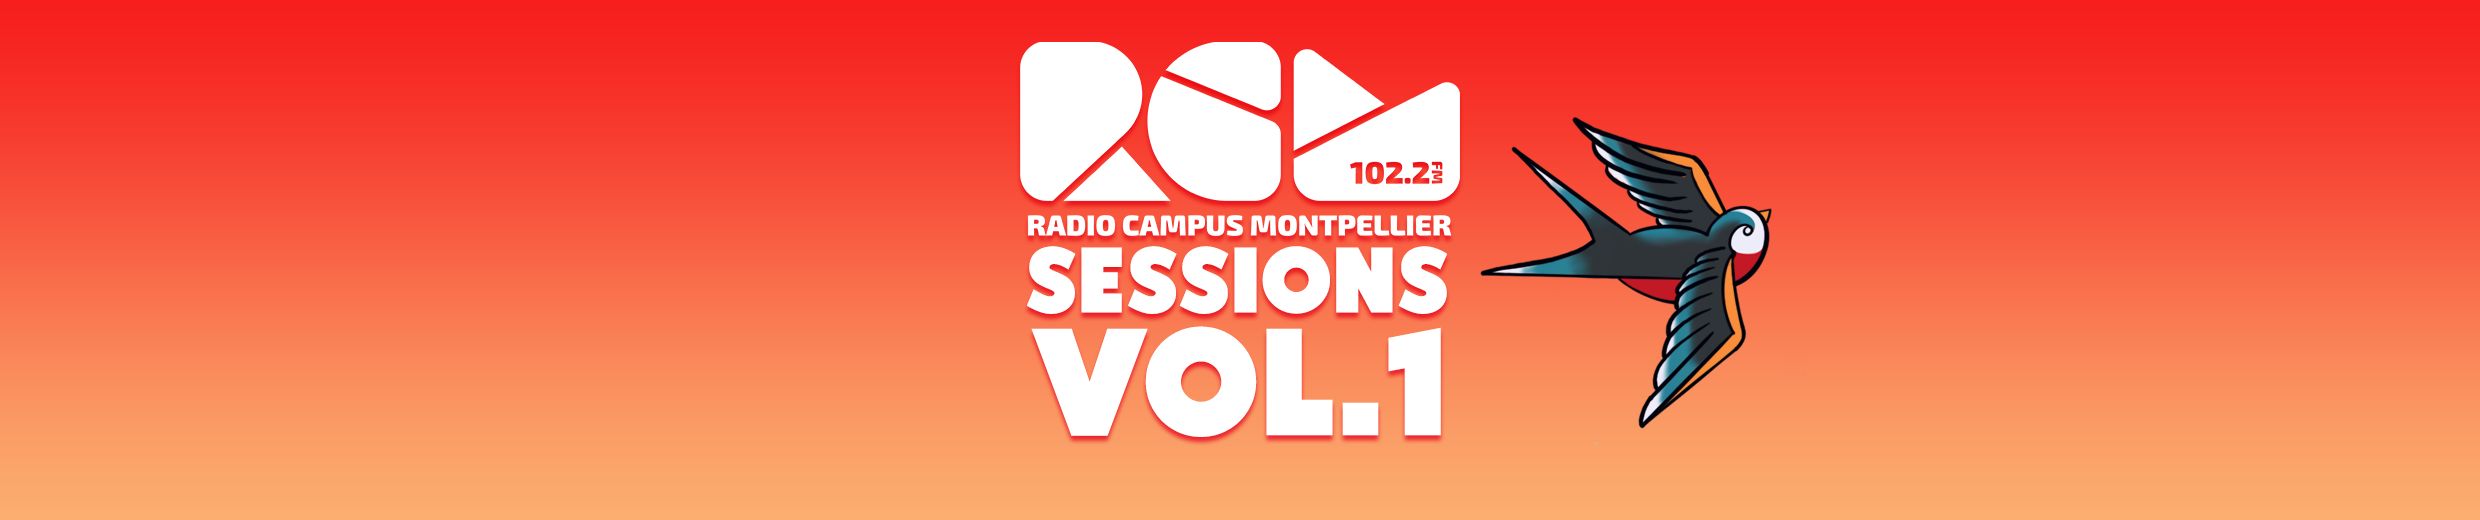 Stream Radio Campus Montpellier music | Listen to songs, albums, playlists  for free on SoundCloud